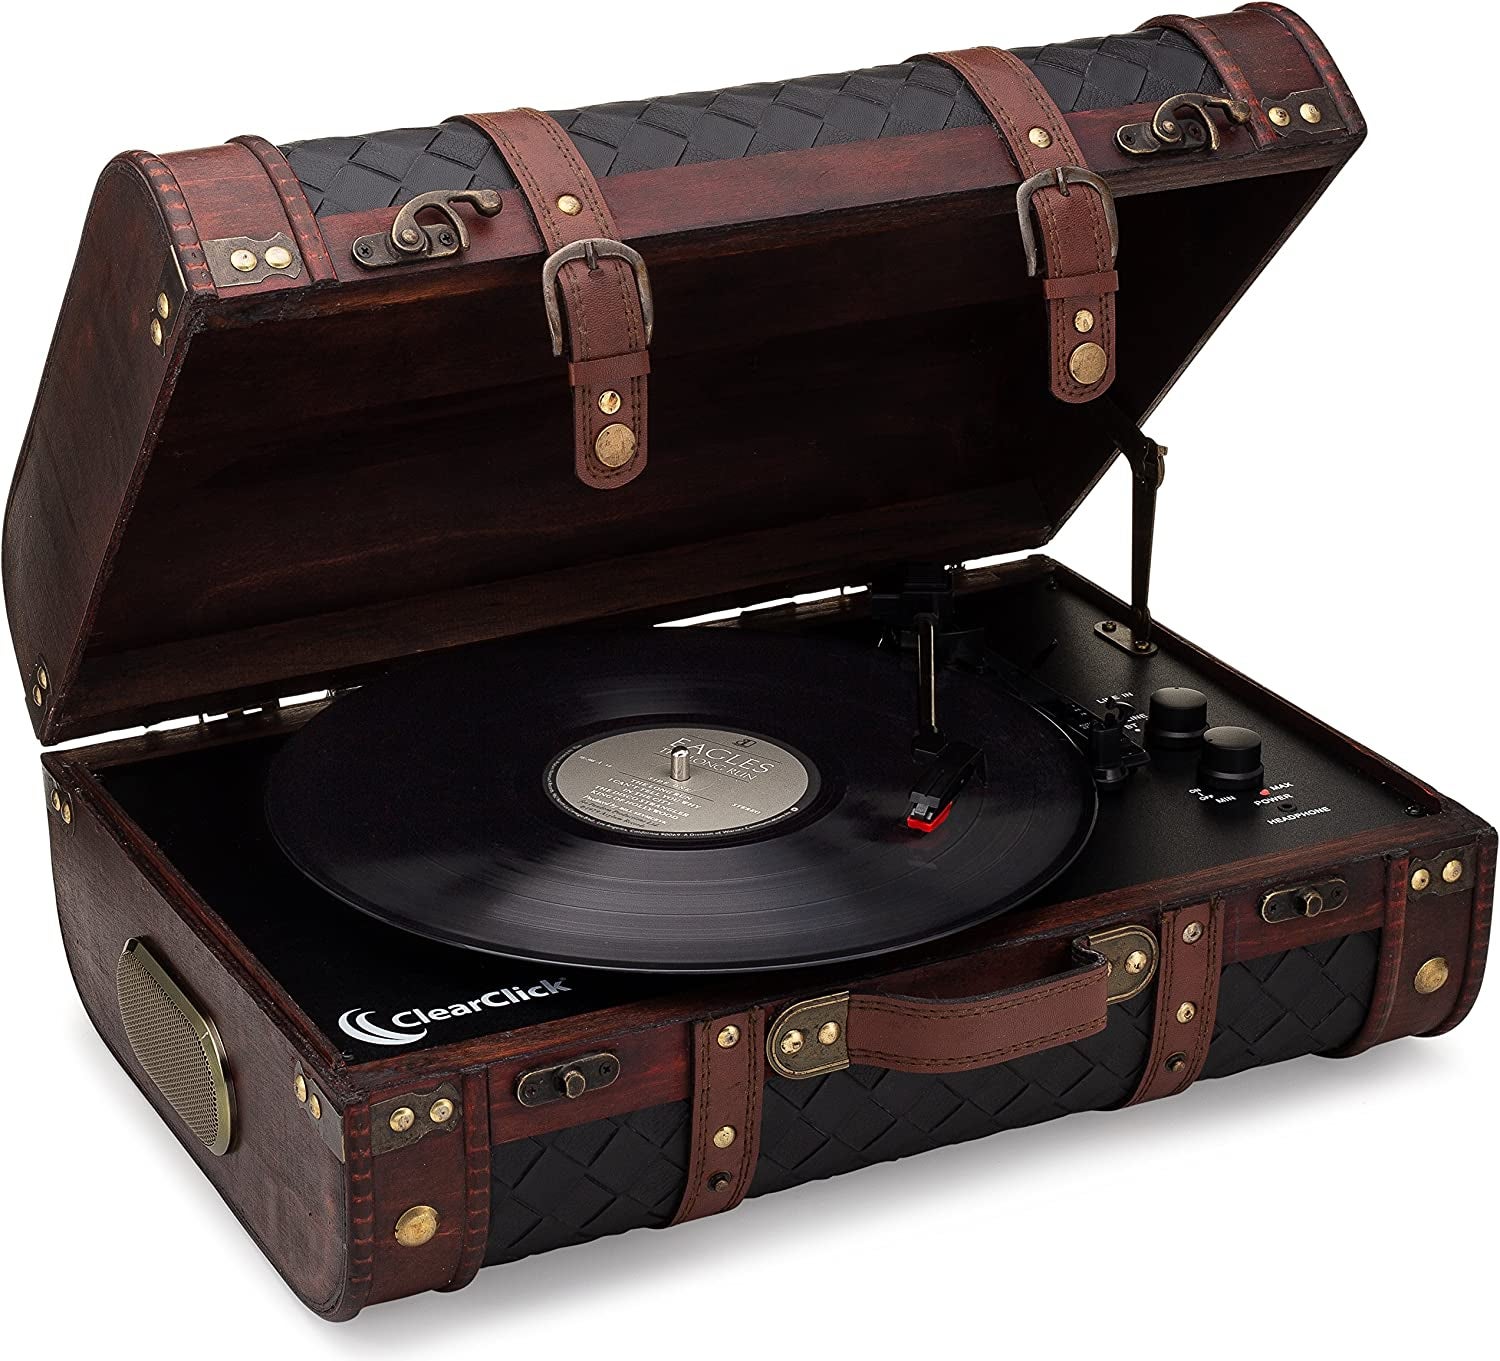 Brown leather vintage-inspired portable turntable with two black dials and antique gold embellishments on a white background